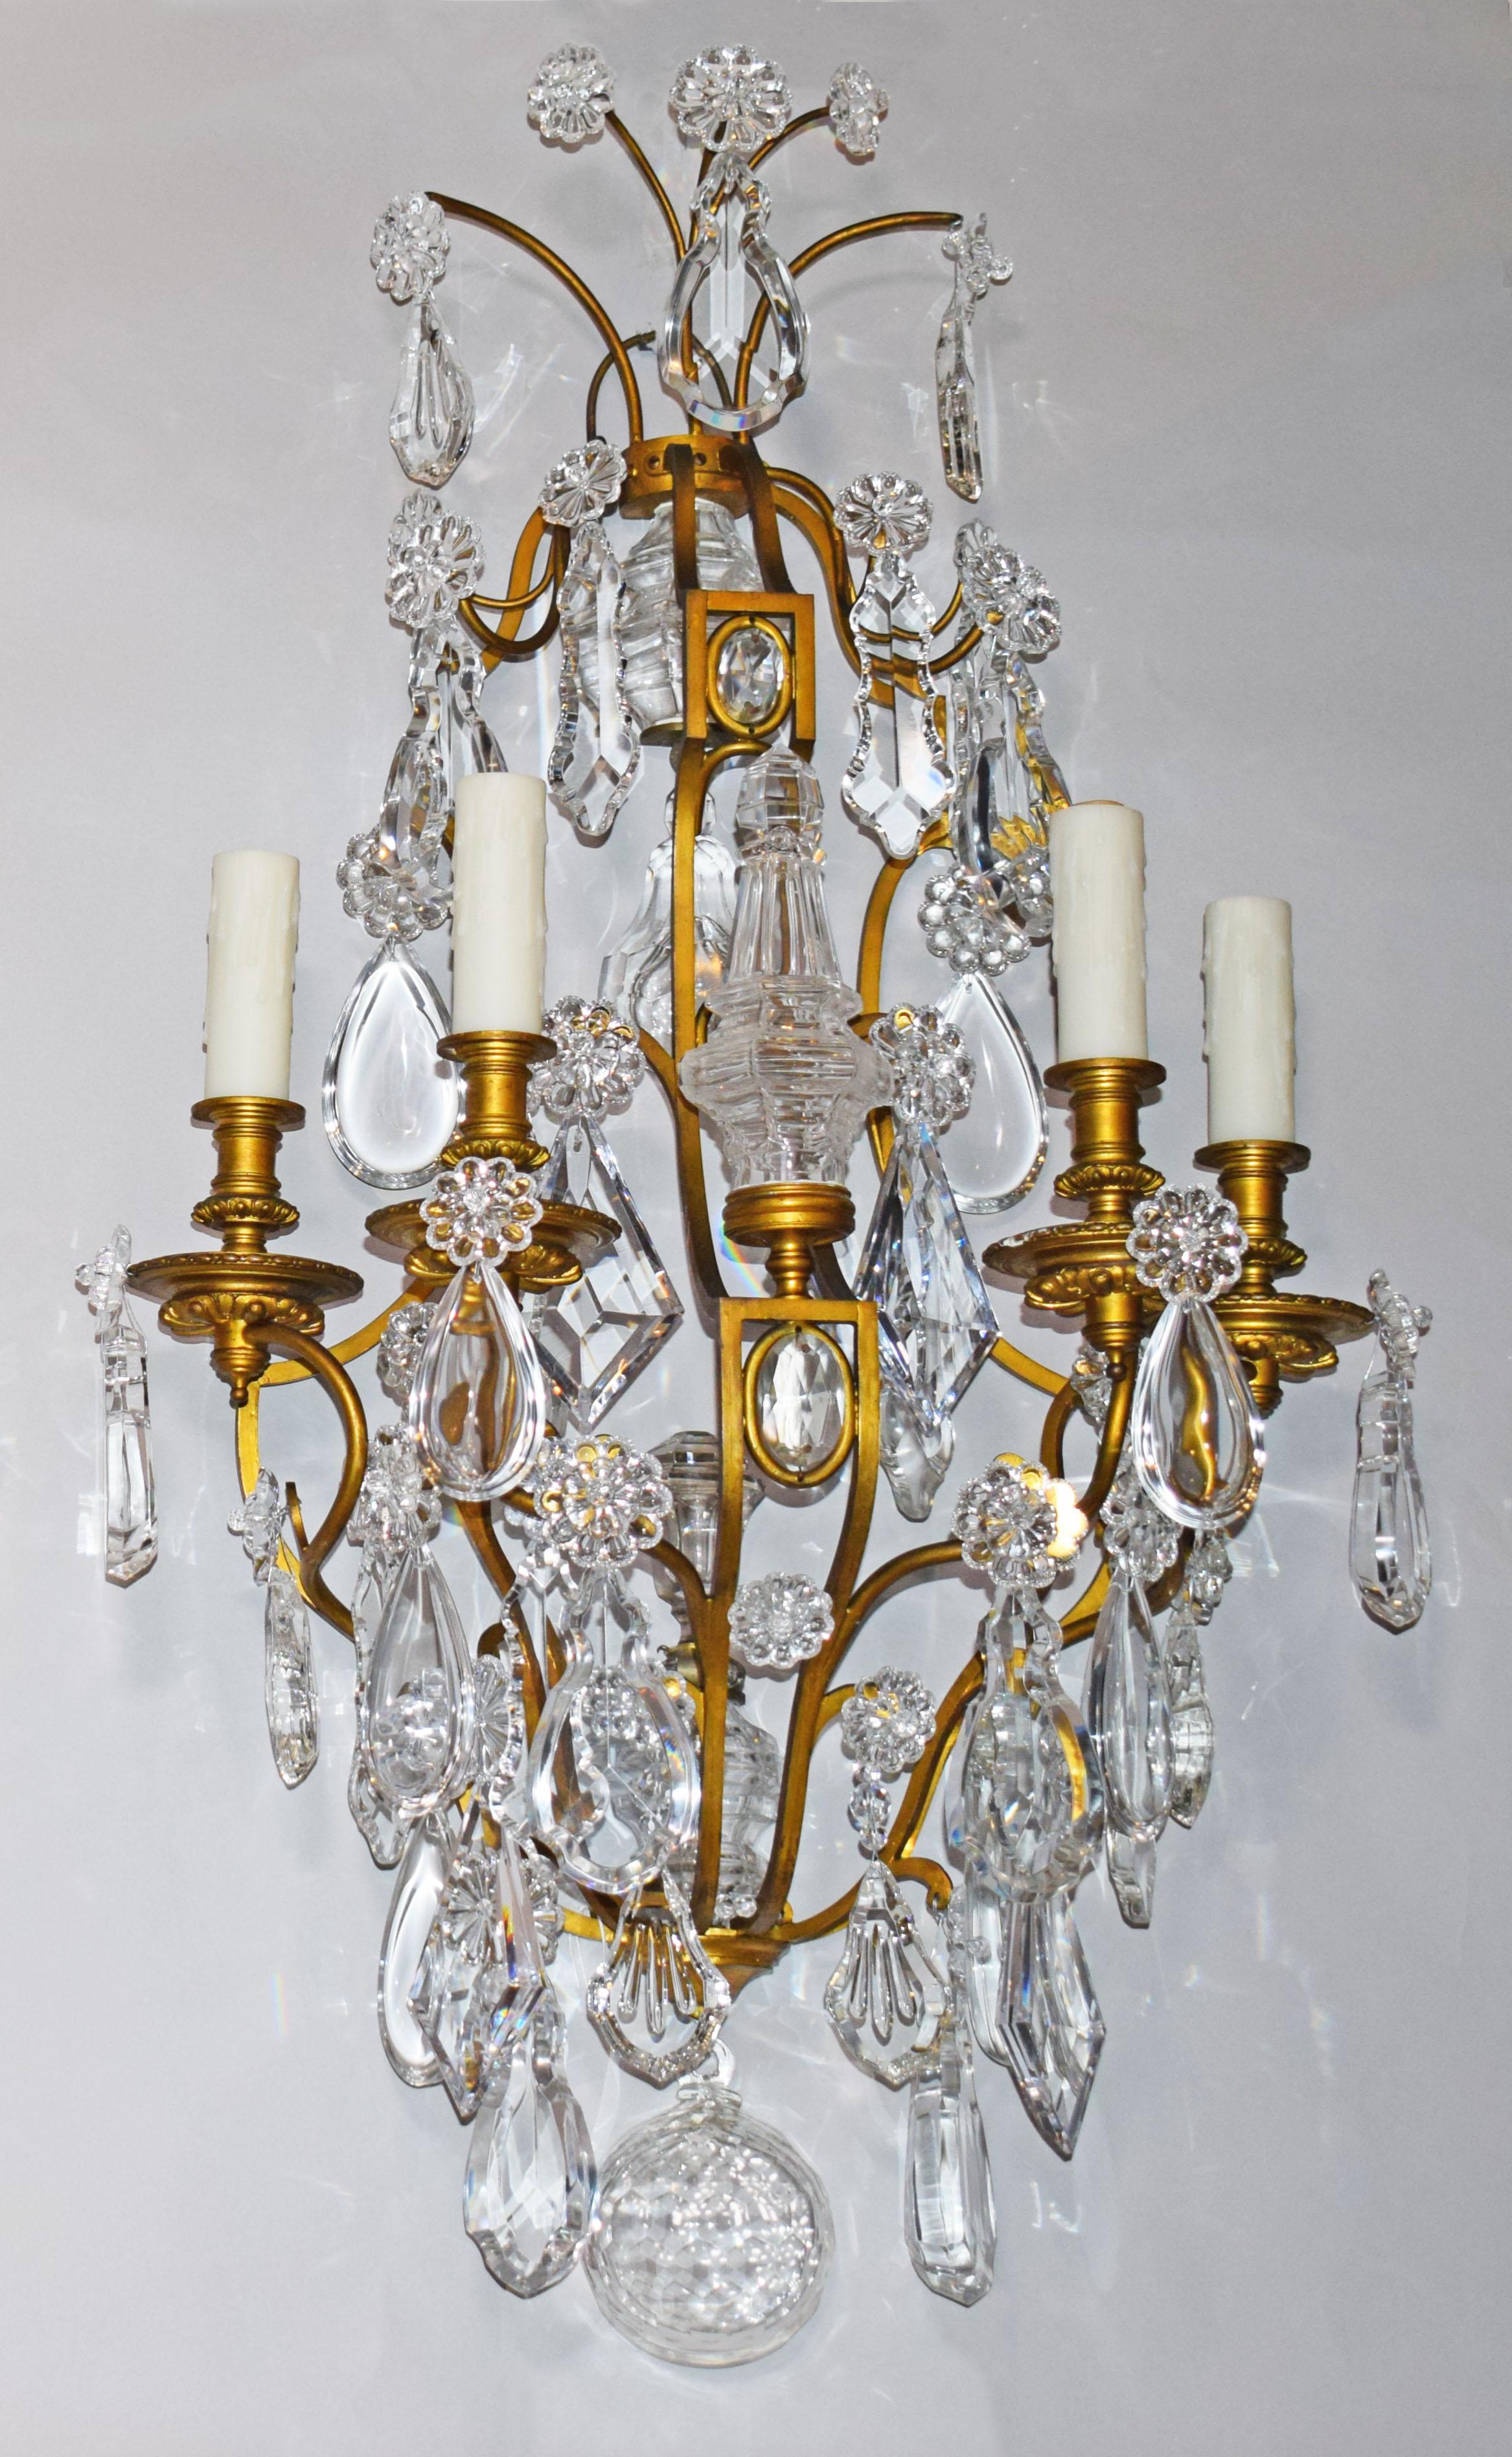 An exceptional pair of gilt bronze & crystal wall sconces by Baccarat. France, circa 1900. 4 lights each.
Dimensions: Height: 35